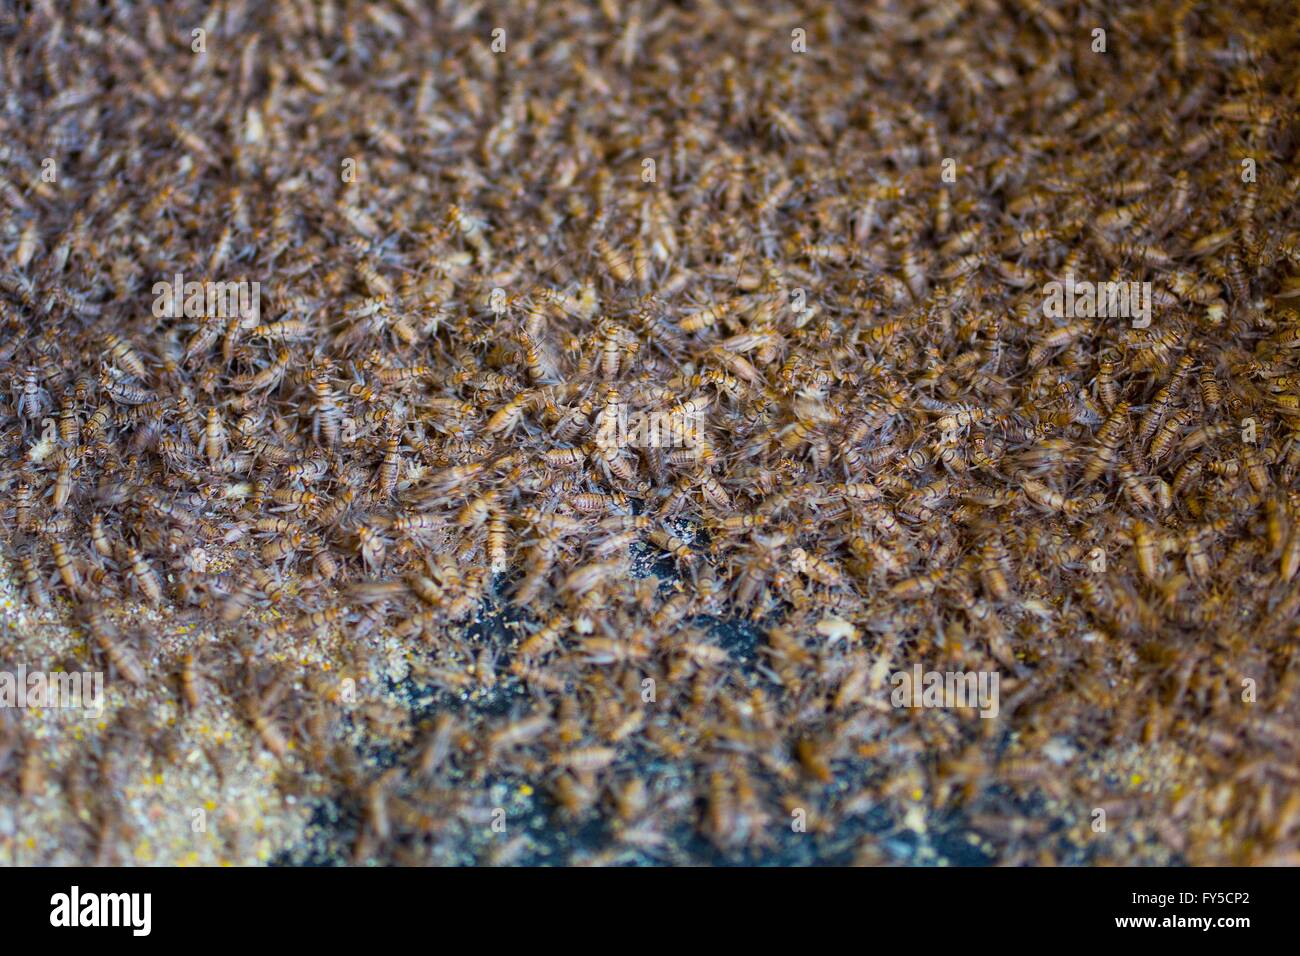 large scale production of edible insects (crickets) in Holland Stock Photo